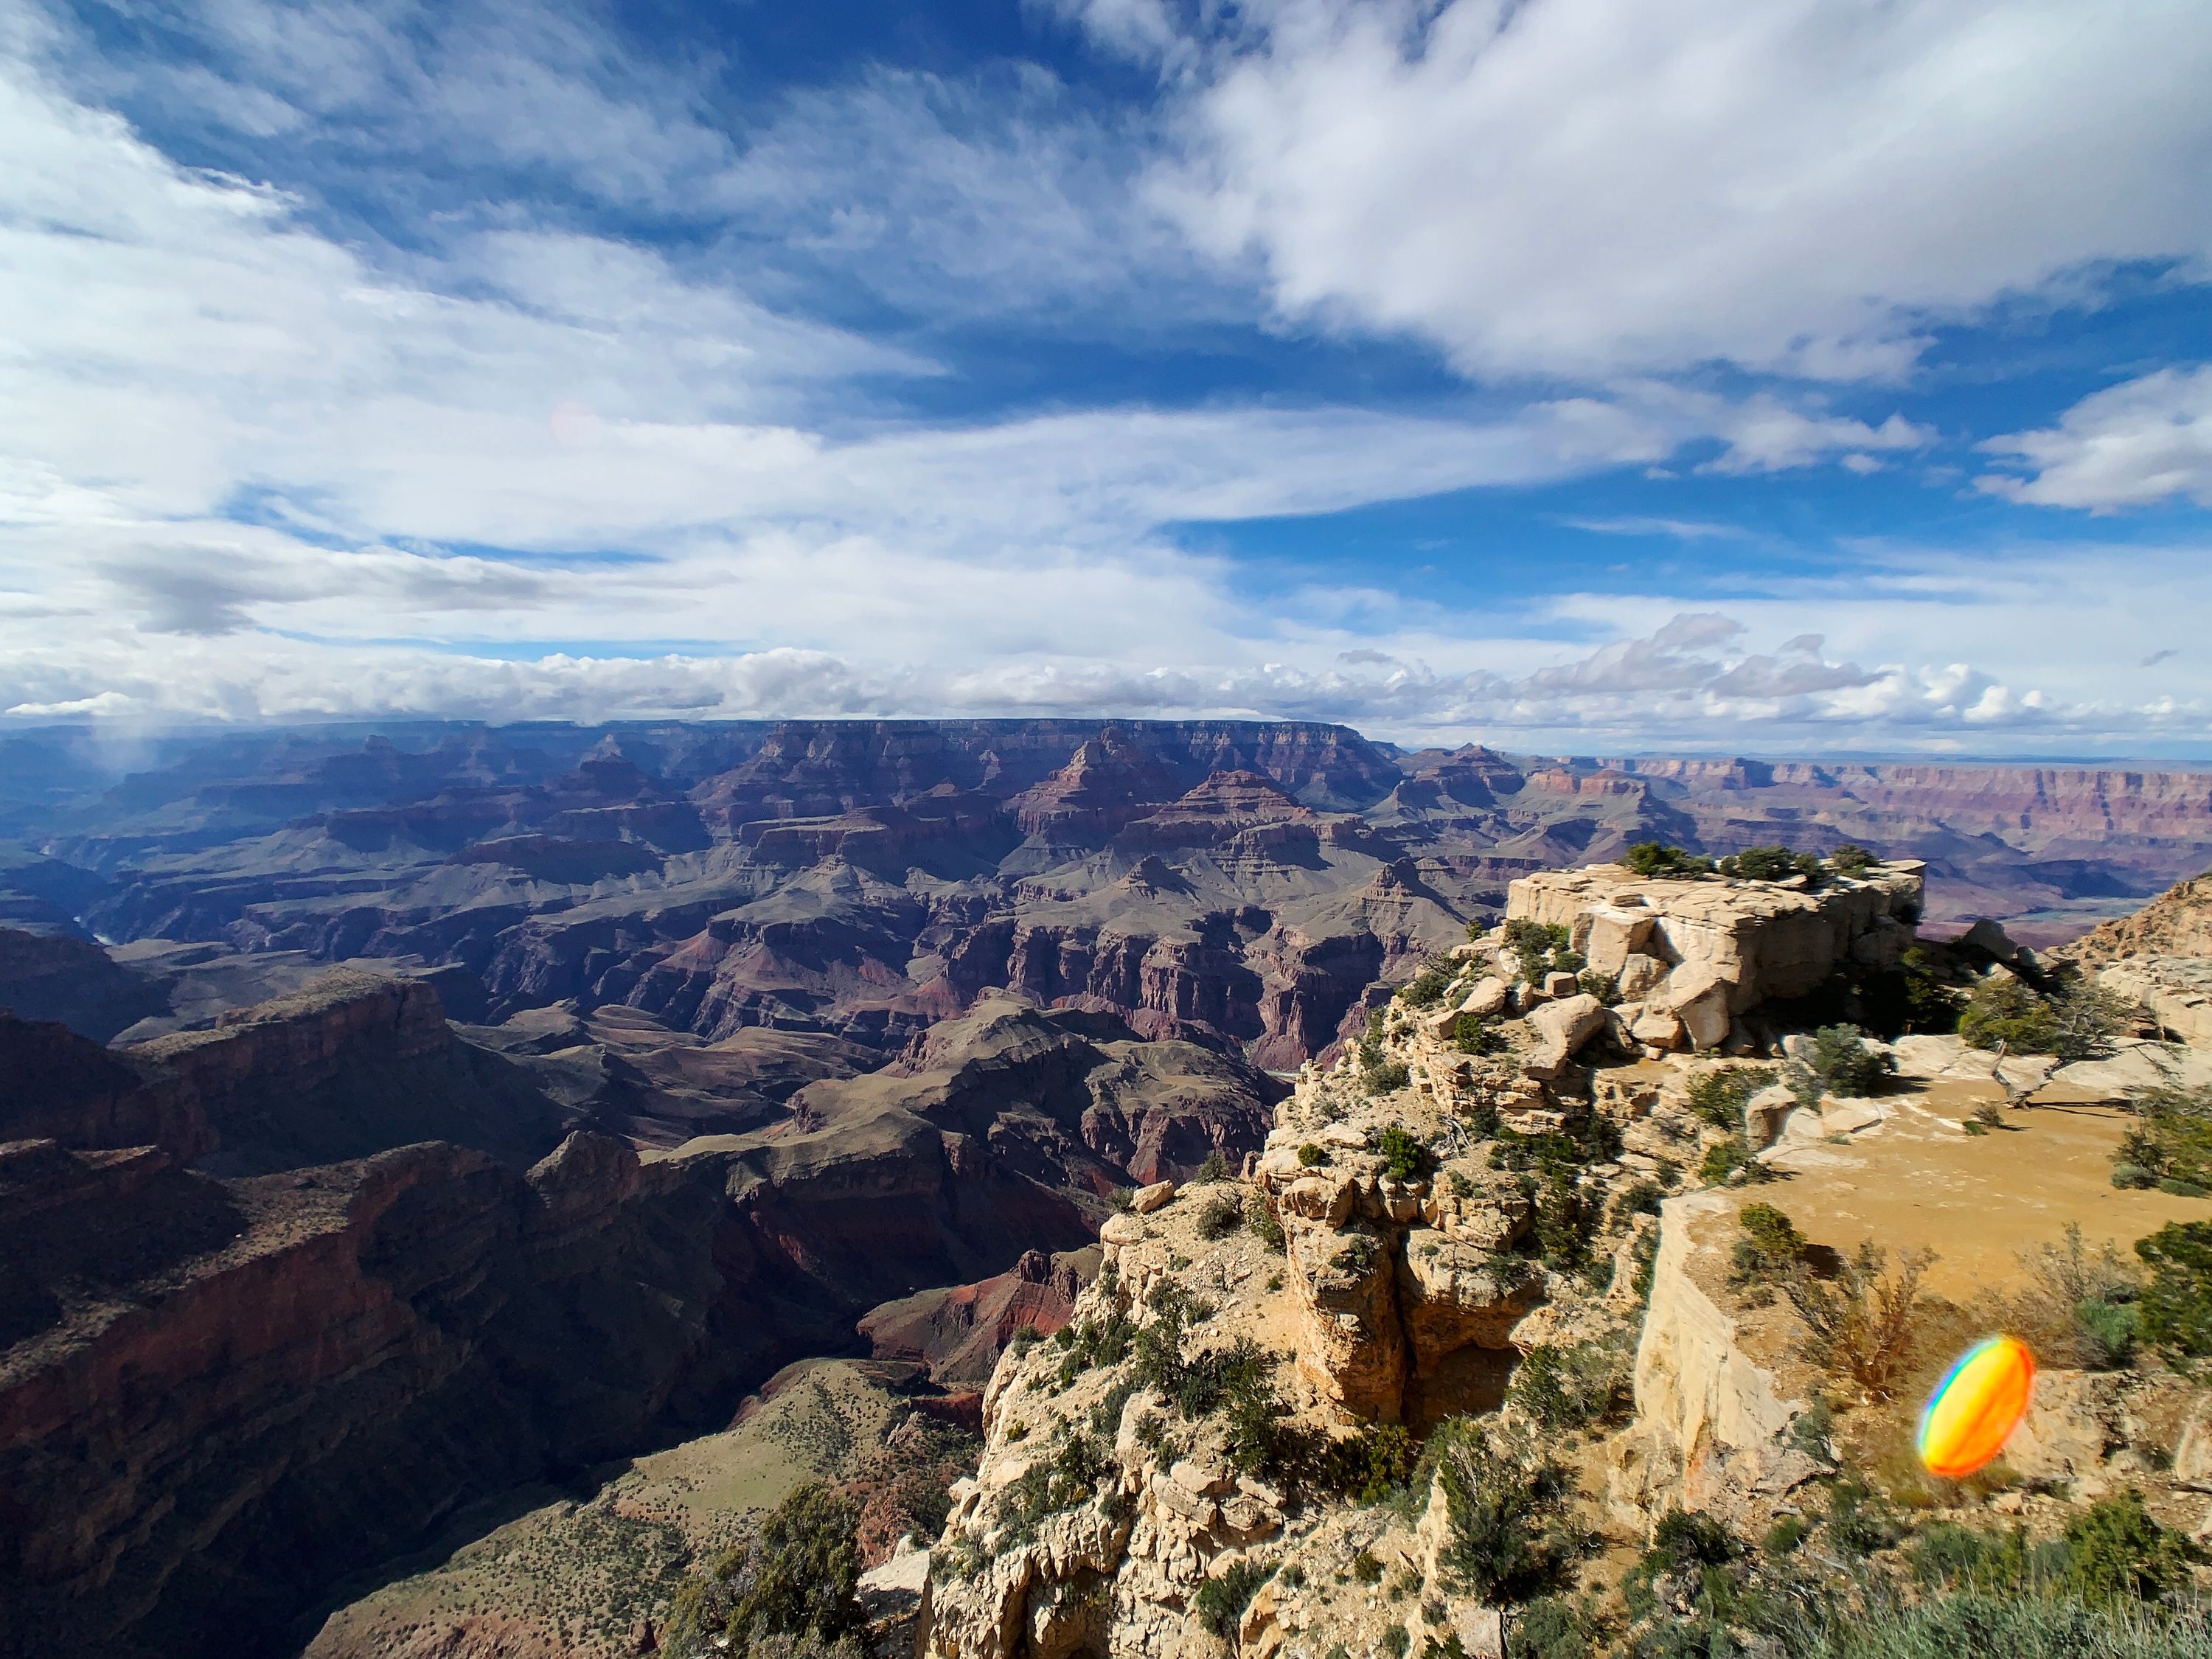 A View of the Grand Canyon near Moran Point